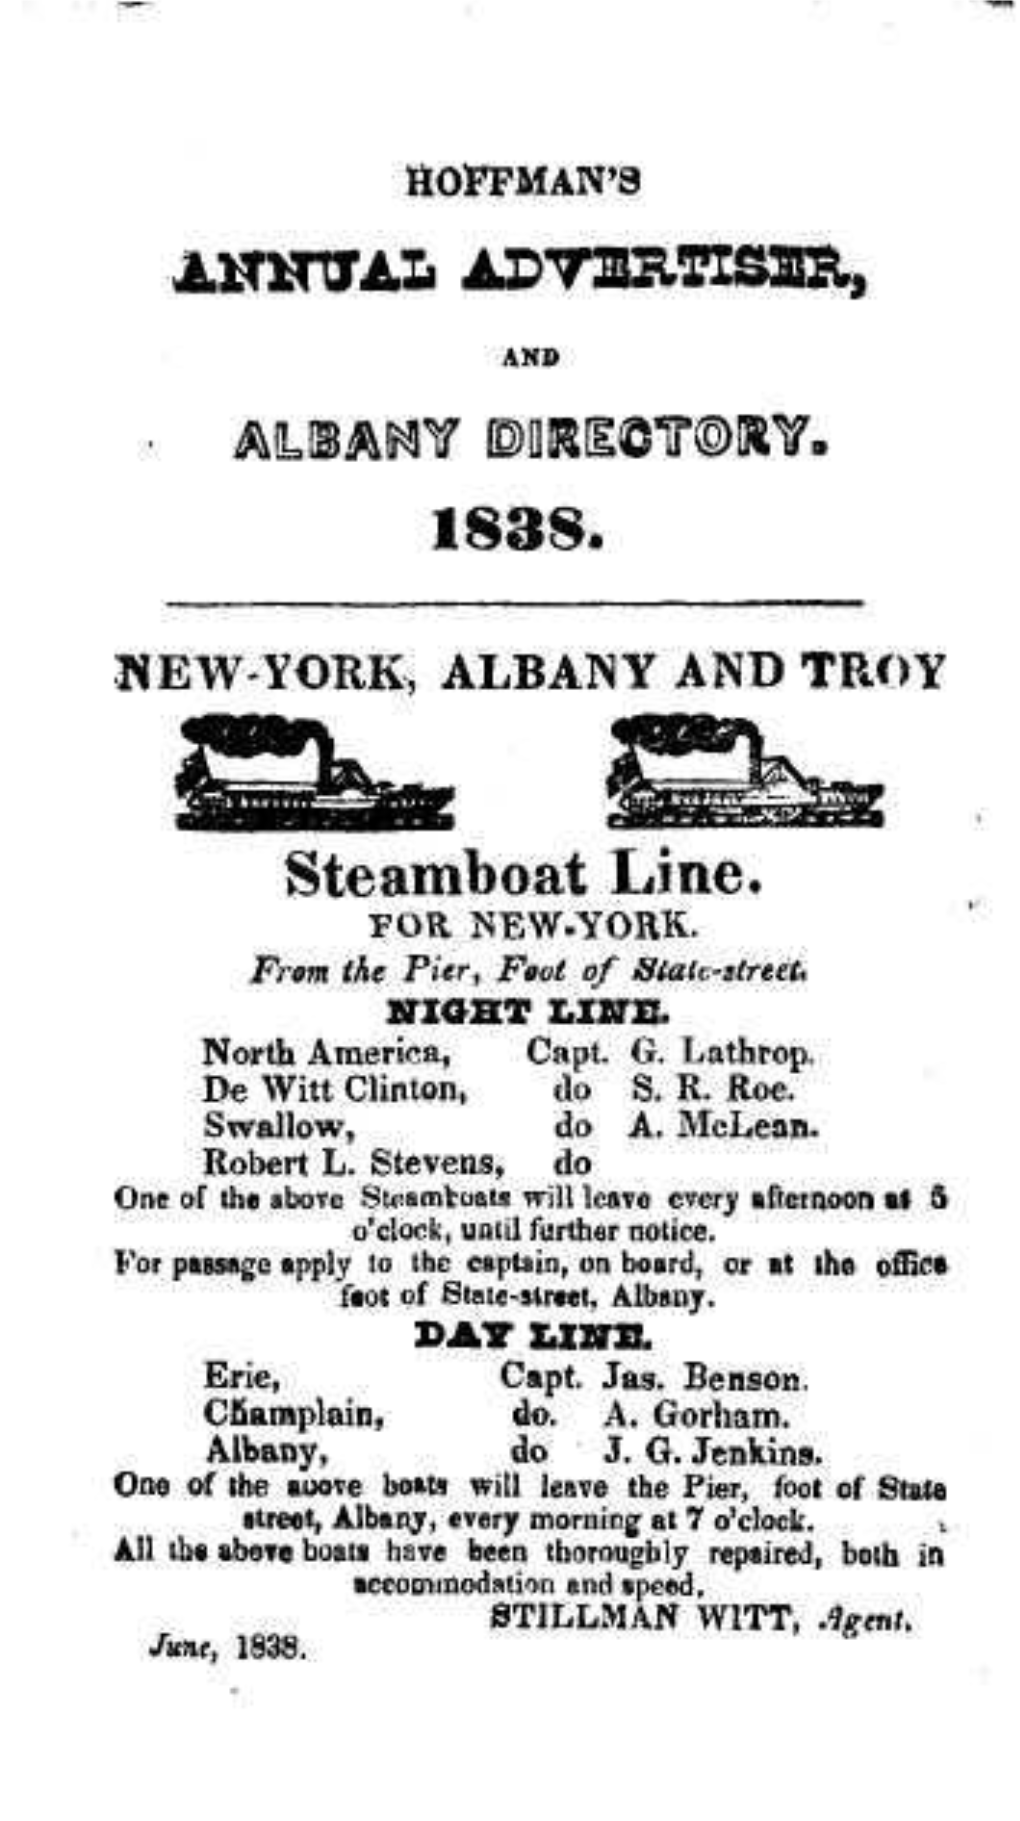 Steamboat Line. for NEW-YORK